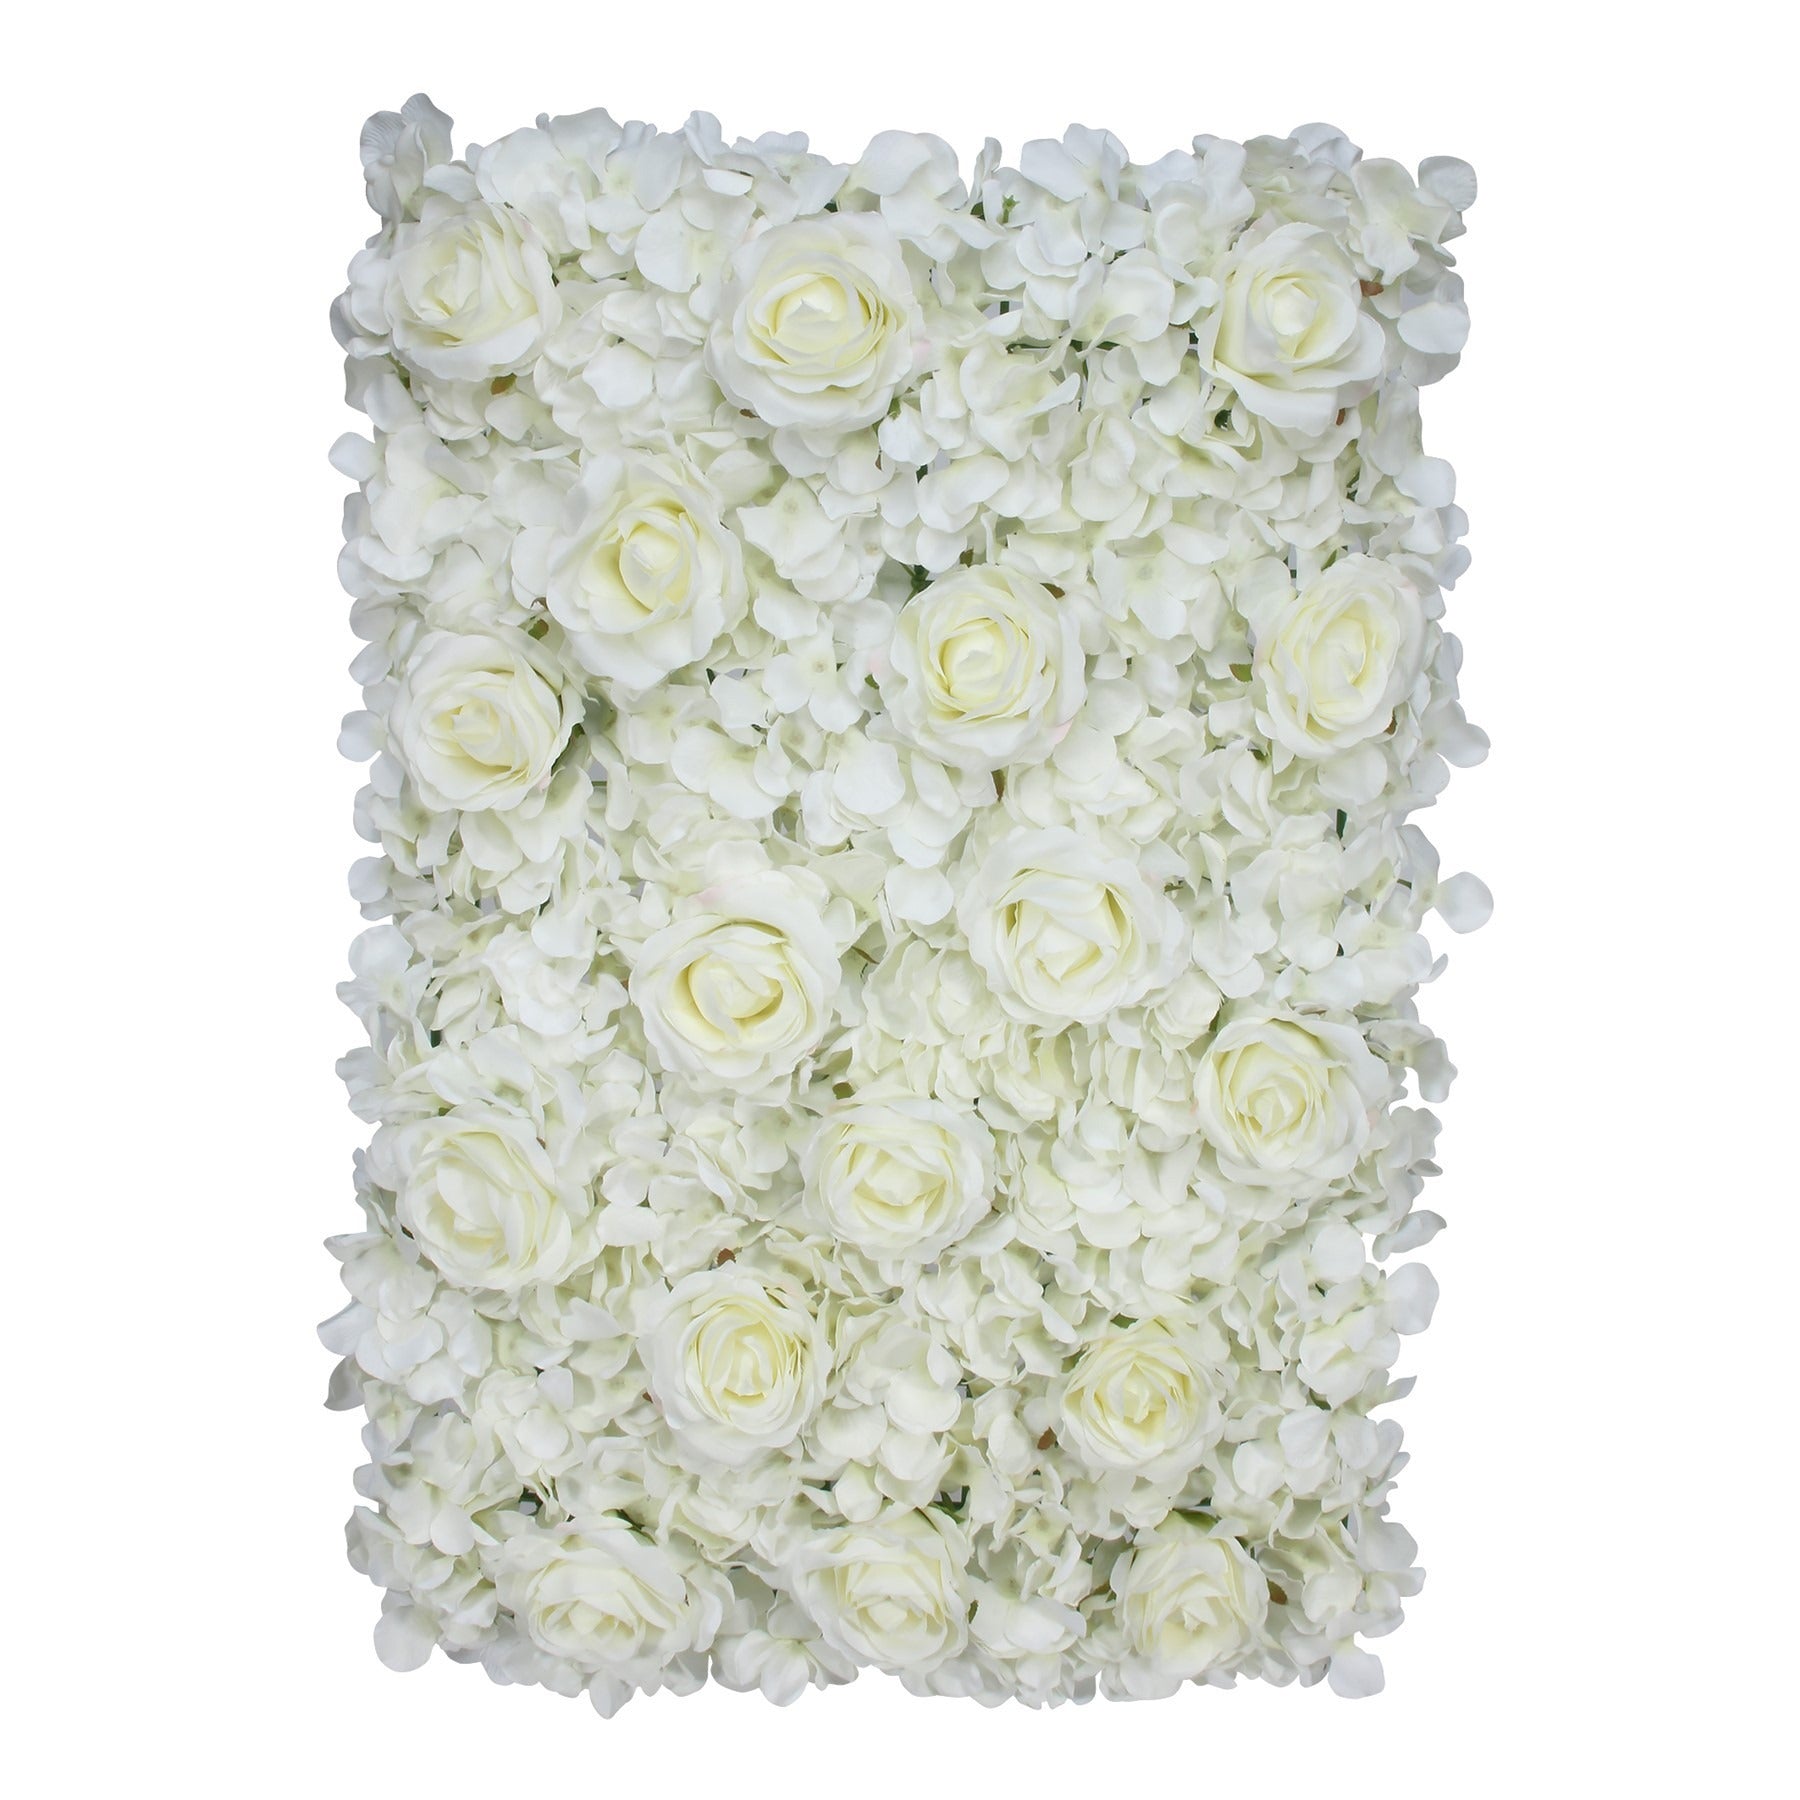 View Cream Hydrangea Flower Wall with Roses 40x60cm information